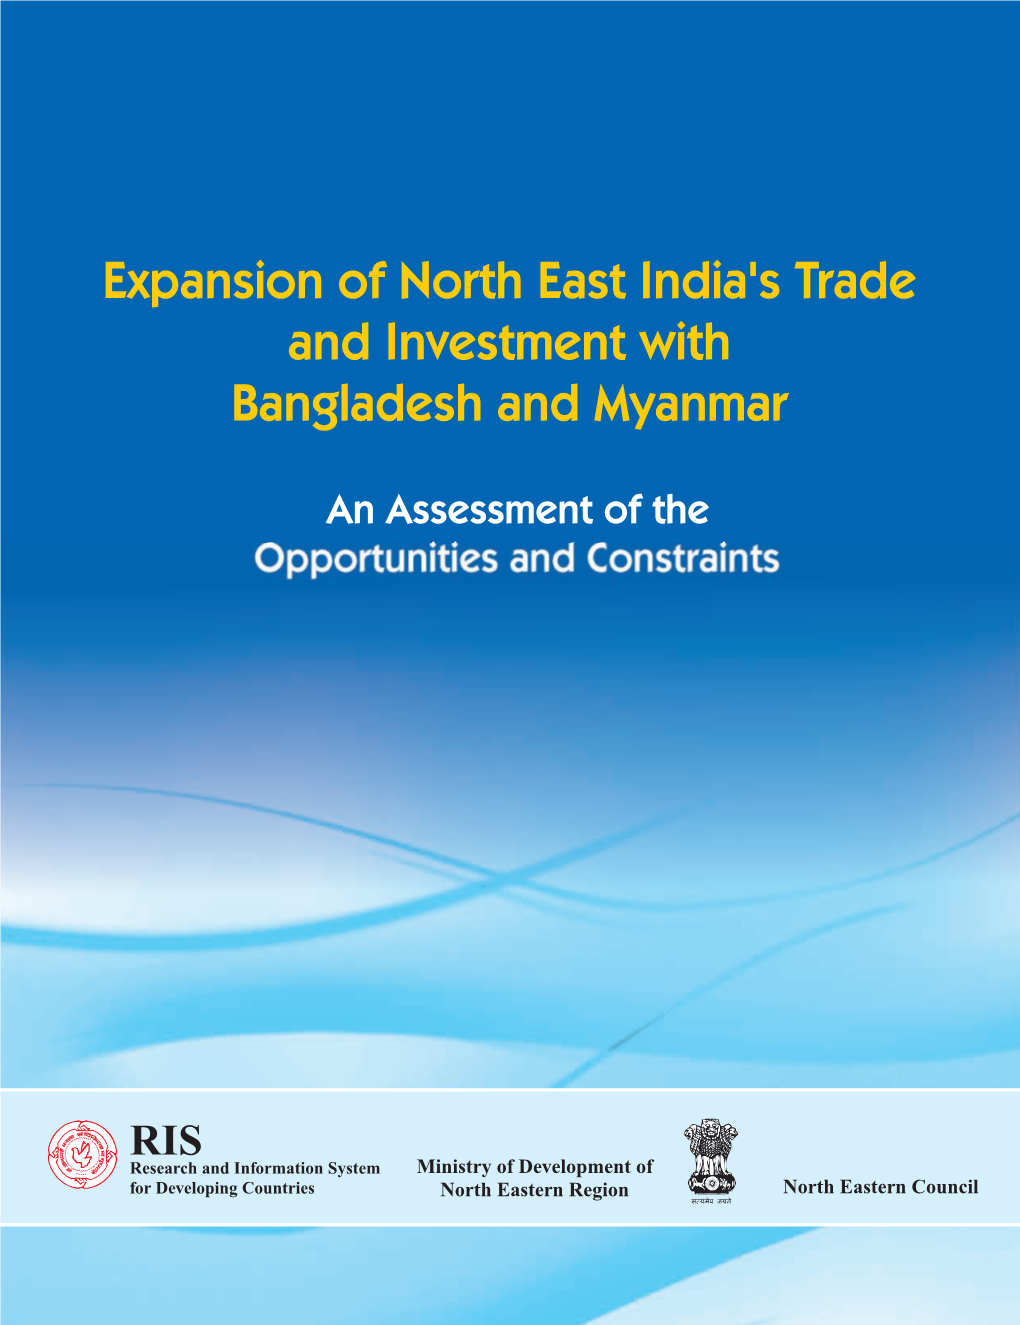 Expansion of North East India's Trade and Investment with Bangladesh and Myanmar